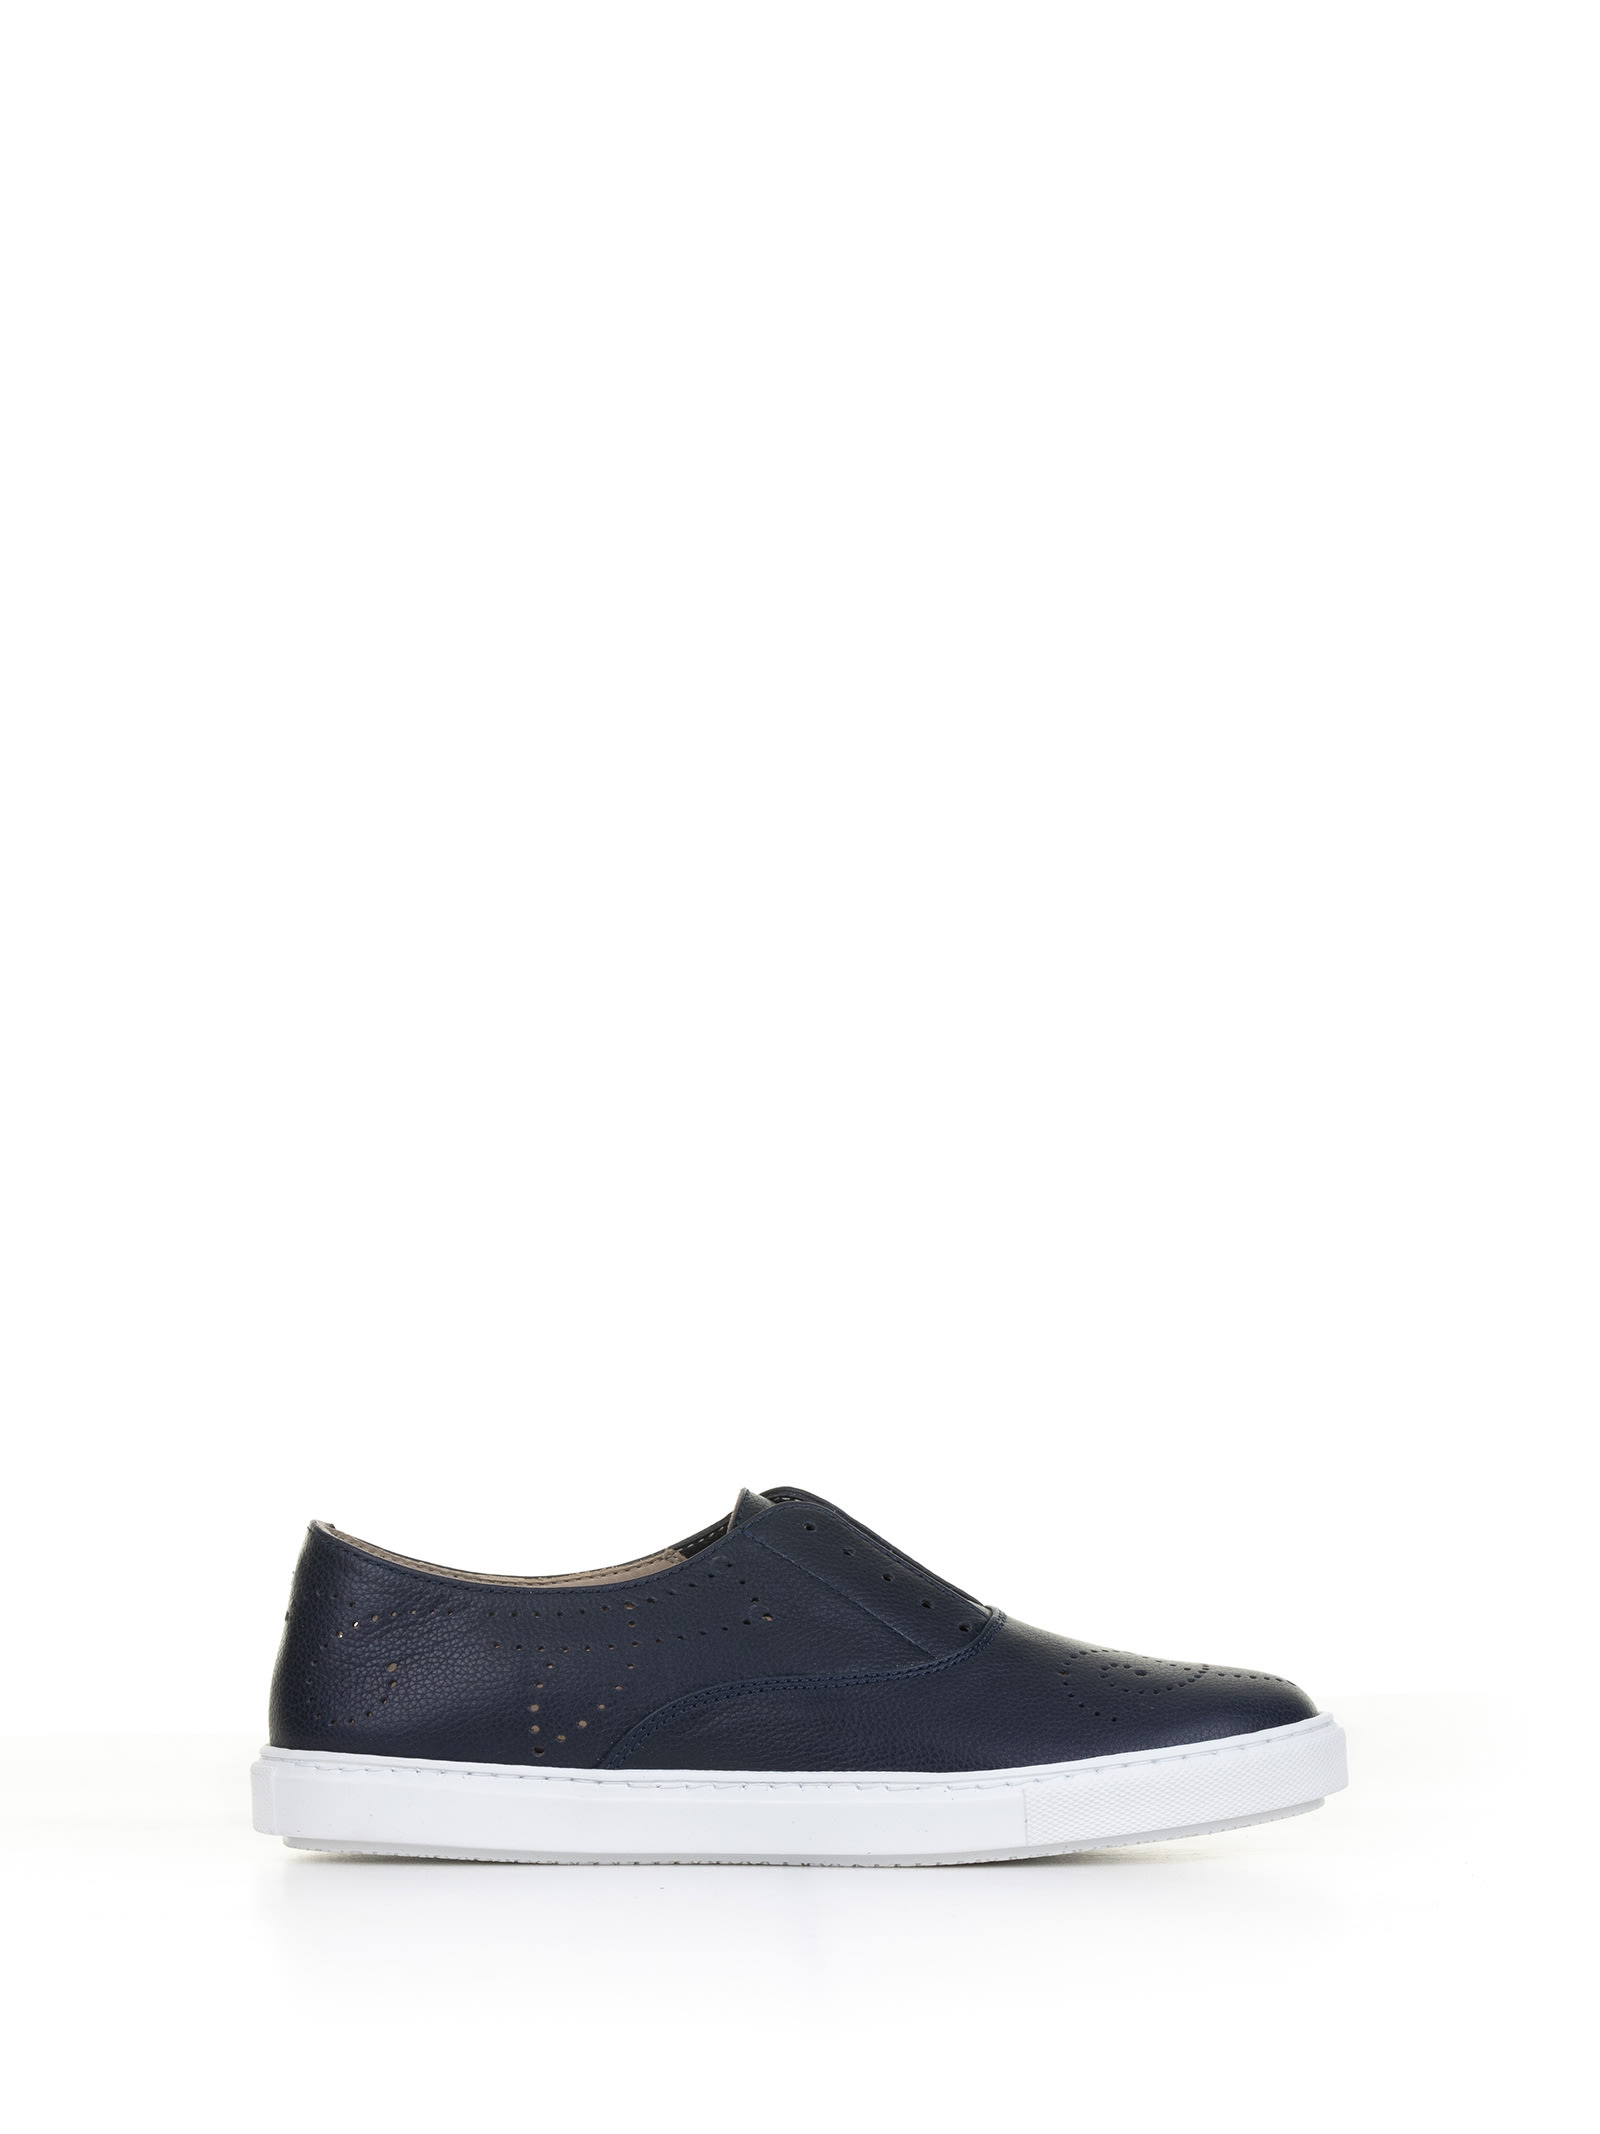 Shop Fratelli Rossetti One Navy Blue Leather Slip-on Sneakers